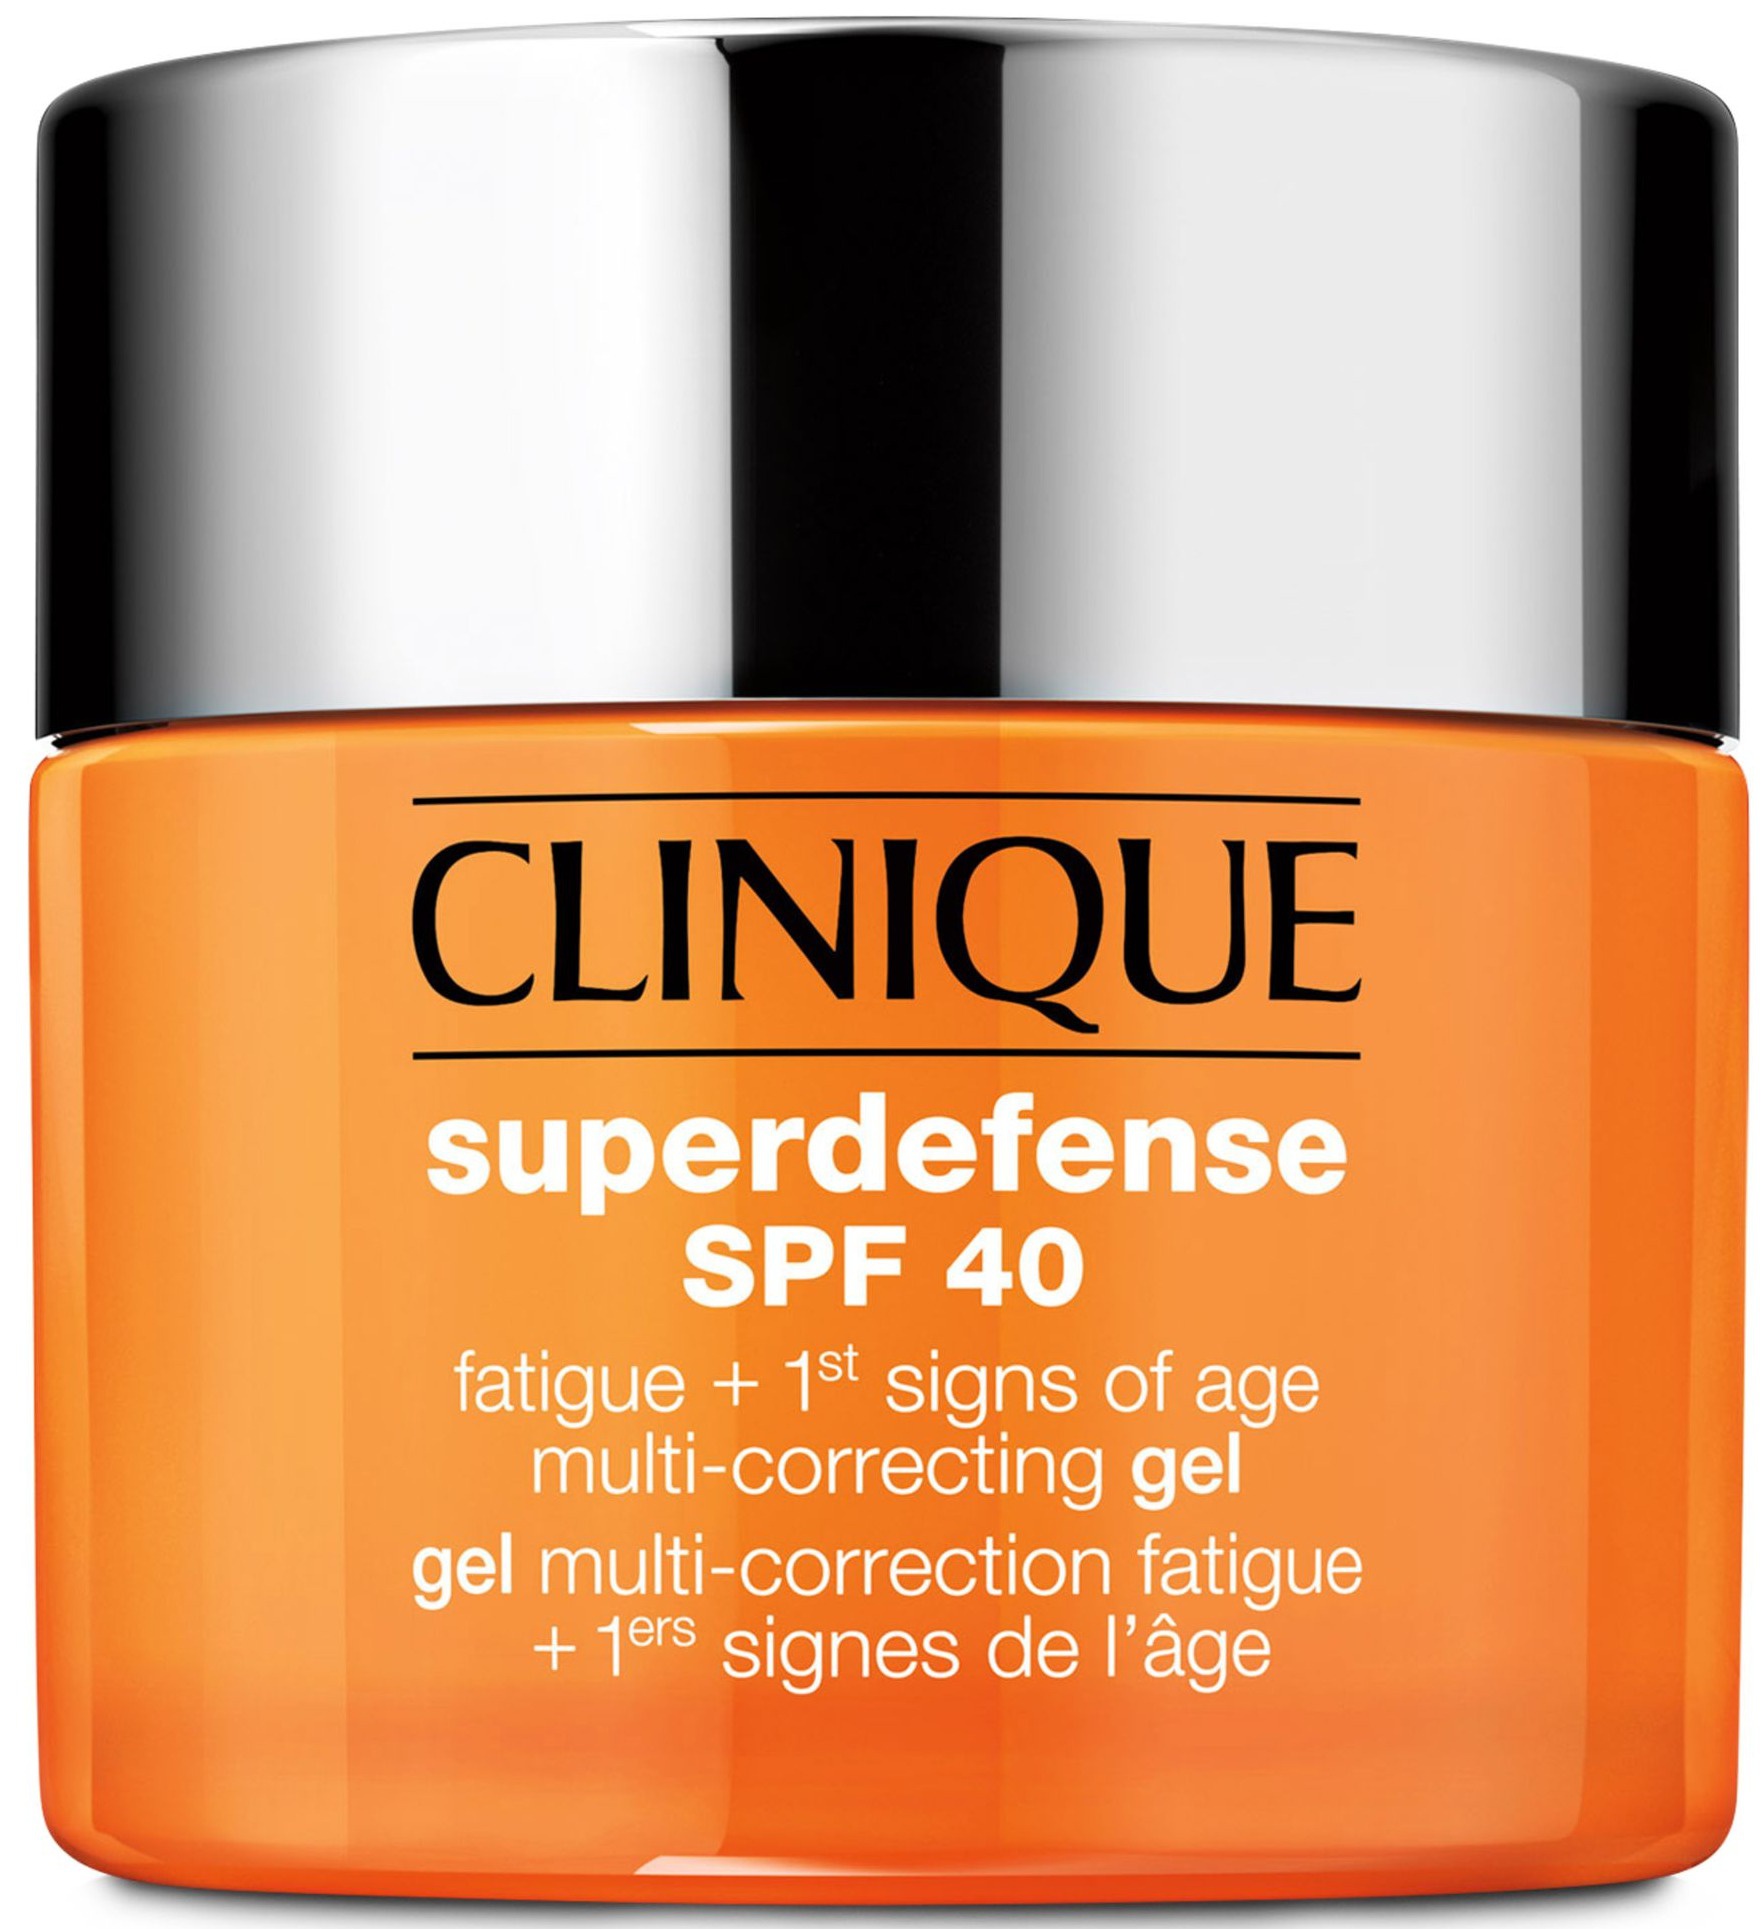 Clinique Superdefense™ SPF 40 Fatigue + 1st Signs Of Age Multi-correcting Gel